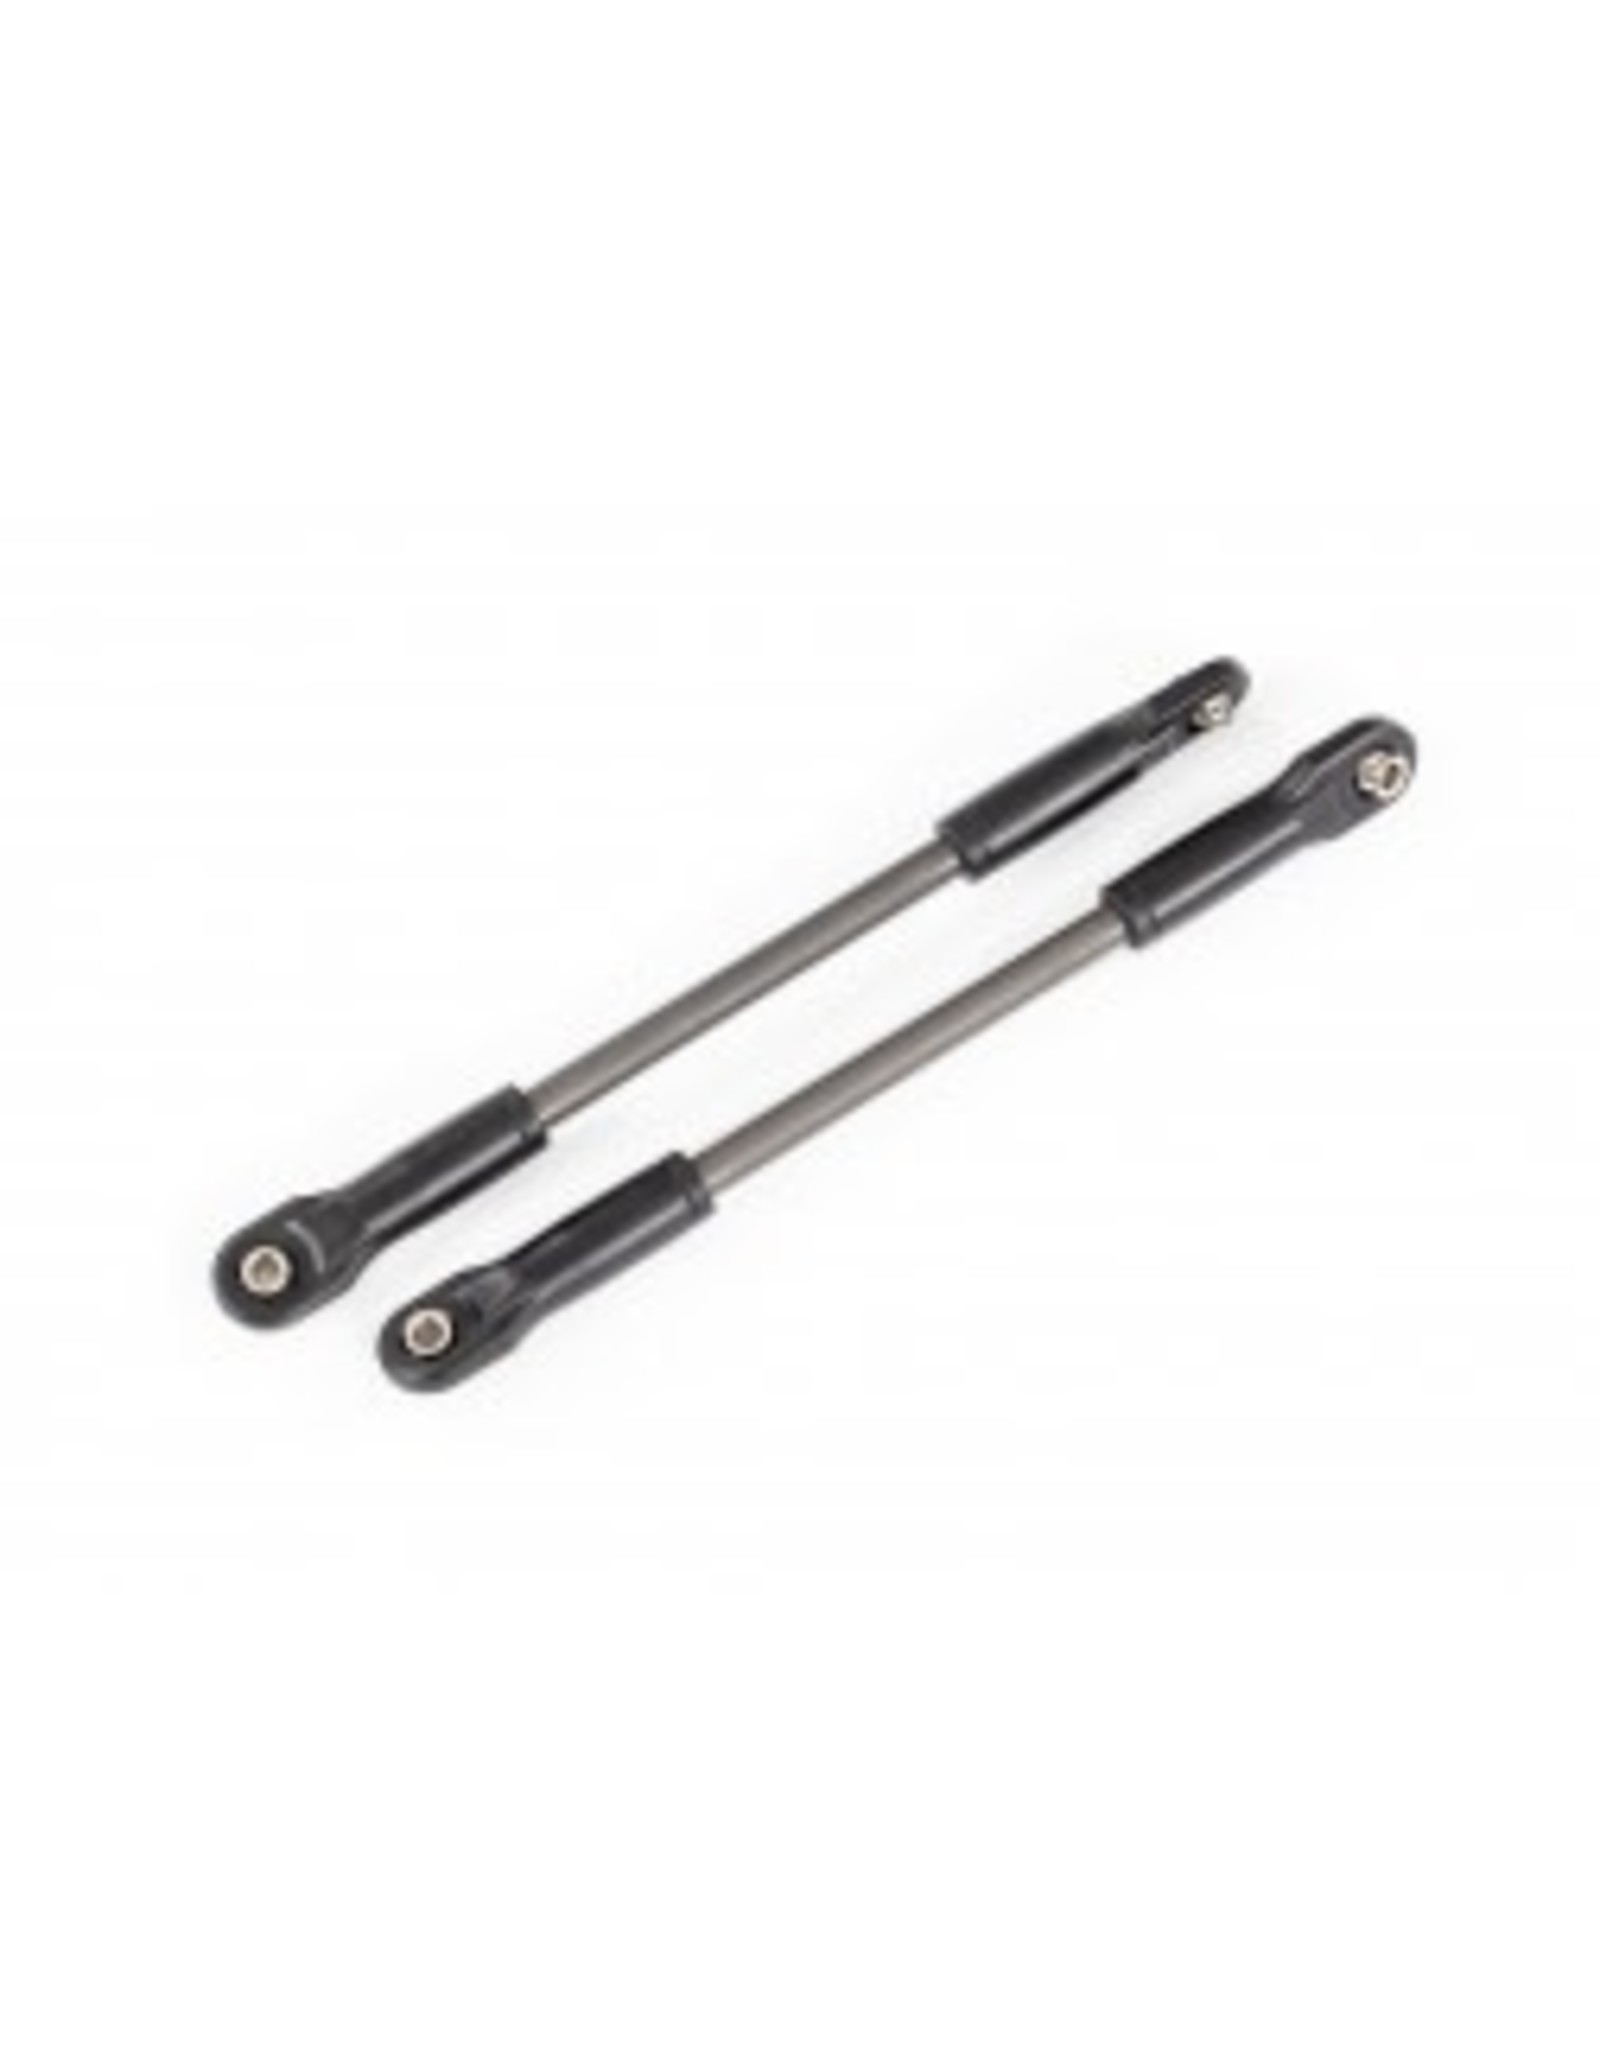 Traxxas Revo Push rods (steel), heavy duty (2) (assembled with rod ends) Traxxas